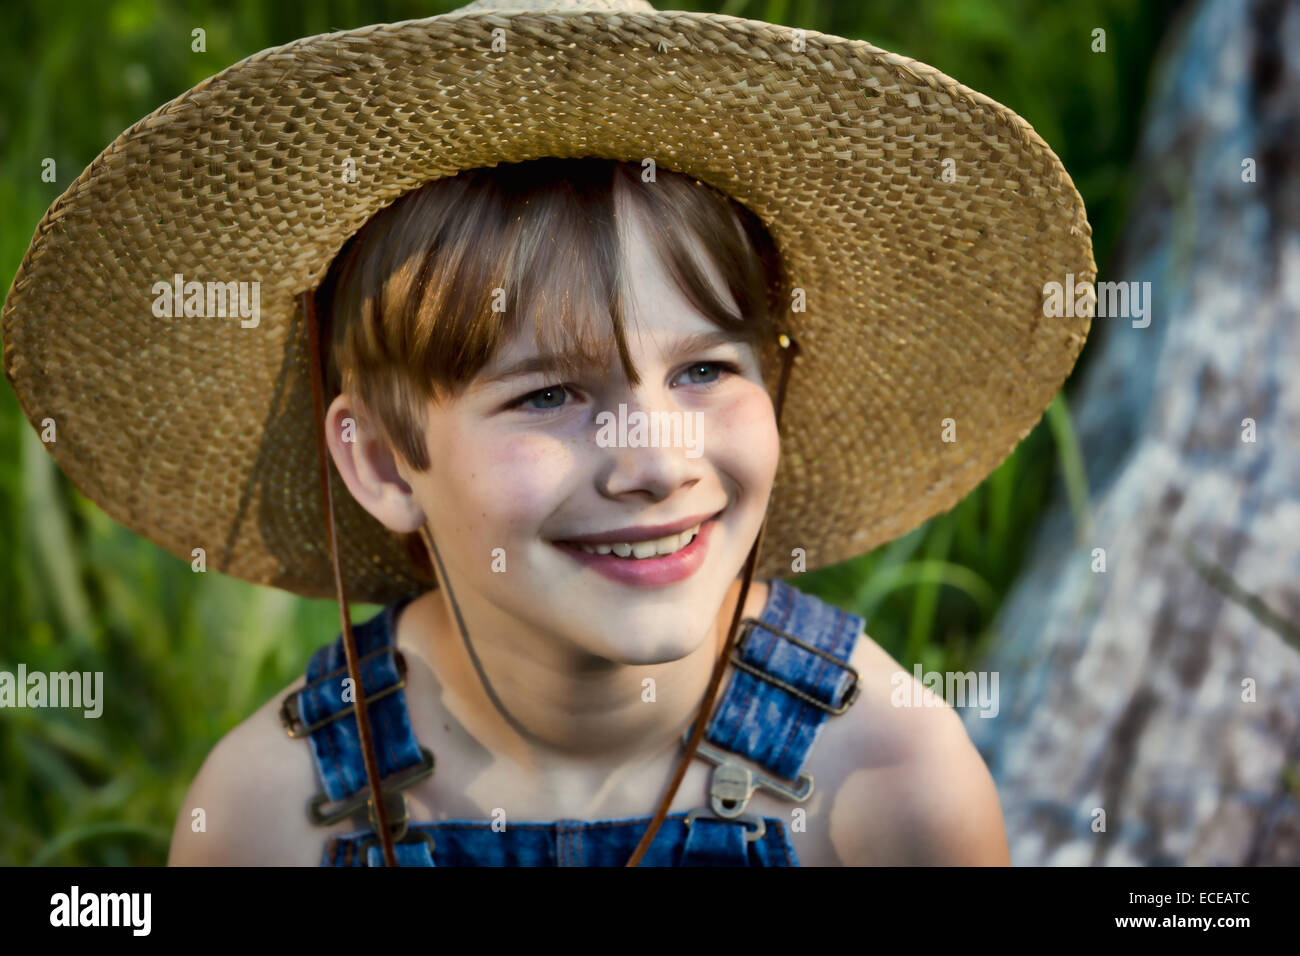 Portrait of a smiling boy wearing a straw hat Stock Photo